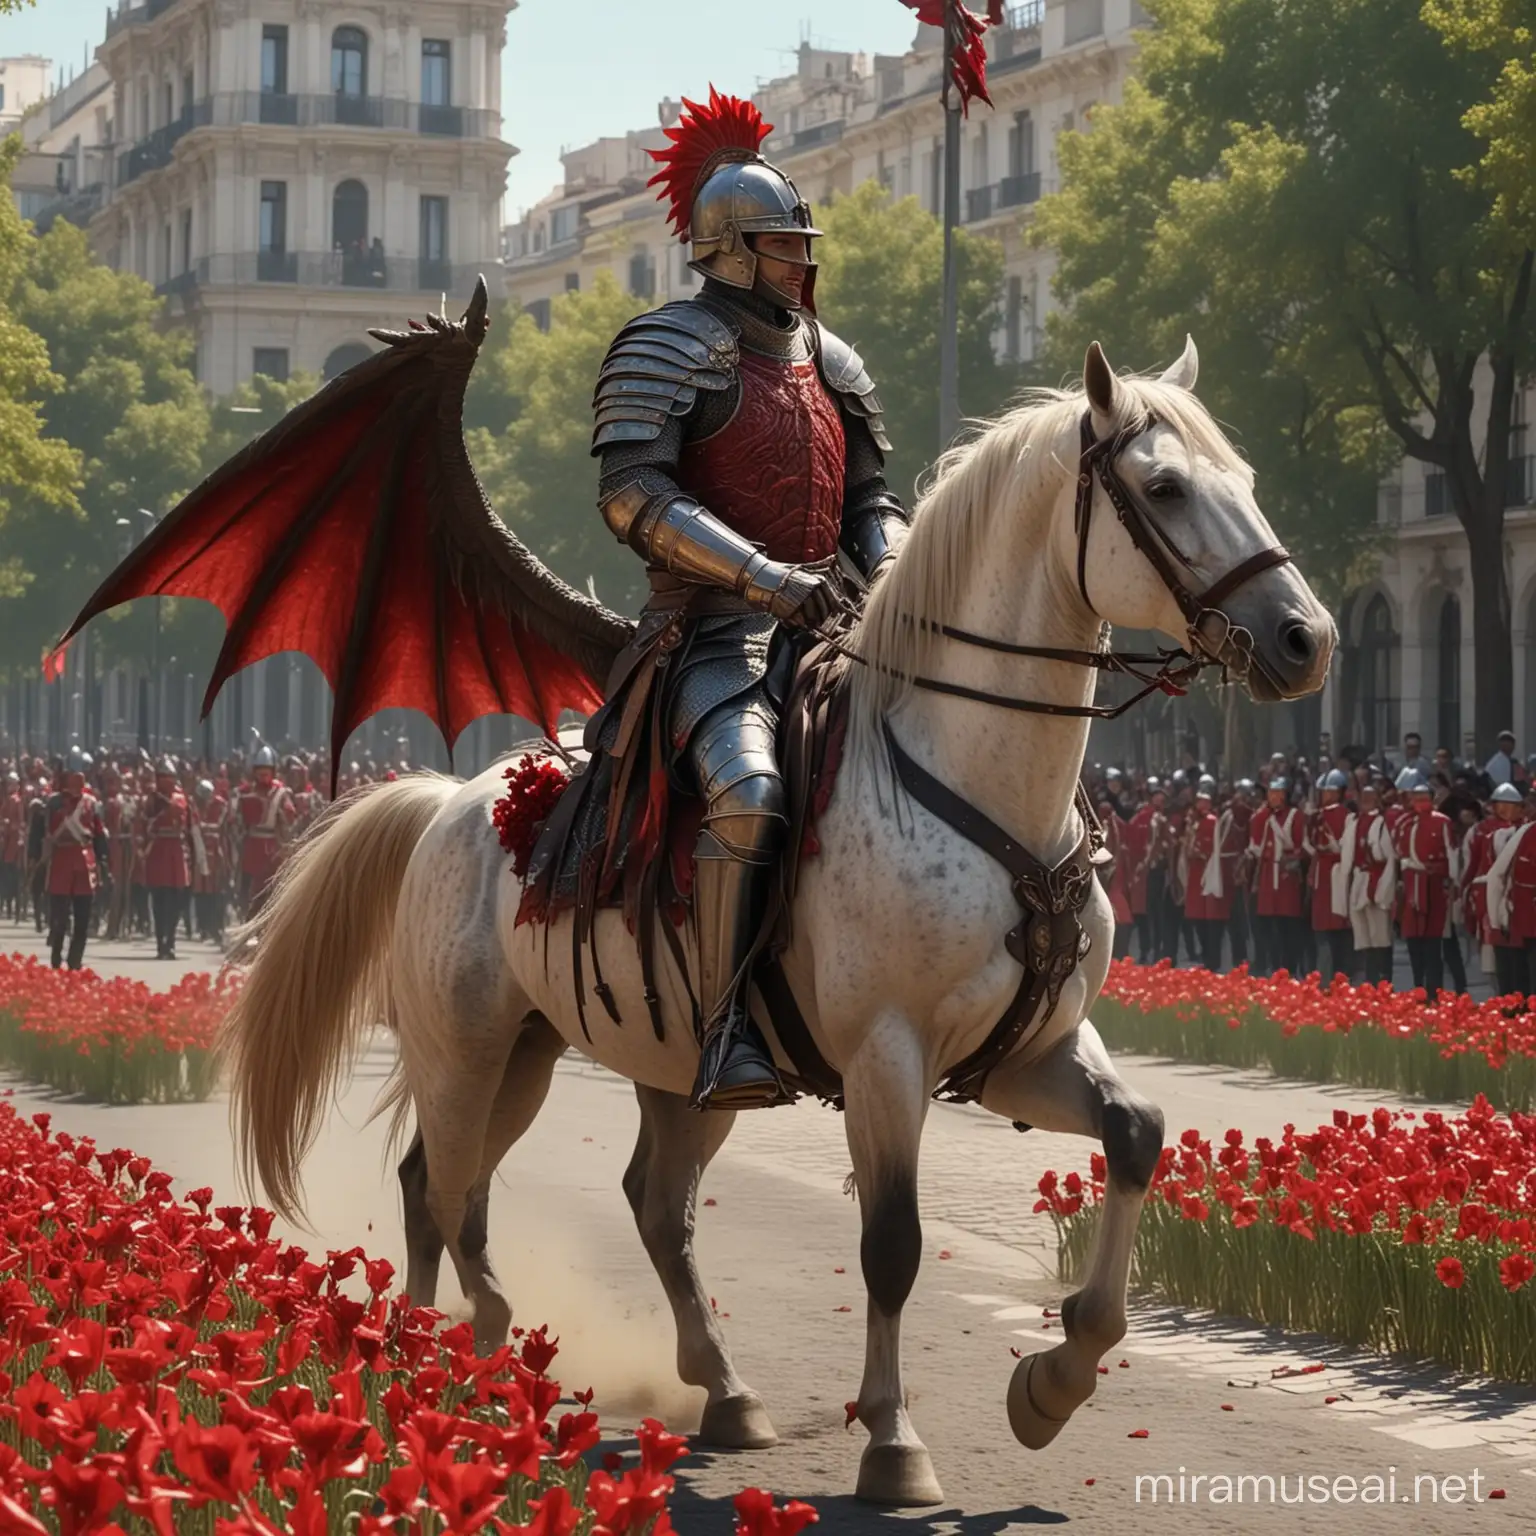 Make a gotic style knight with red dragon wings in hes back in a horse marchng with 20 more solders thru madrid while the peopleis trowing flowers at him and hes solders because they are the heros of the country, 
4k photo, ultrarealistic